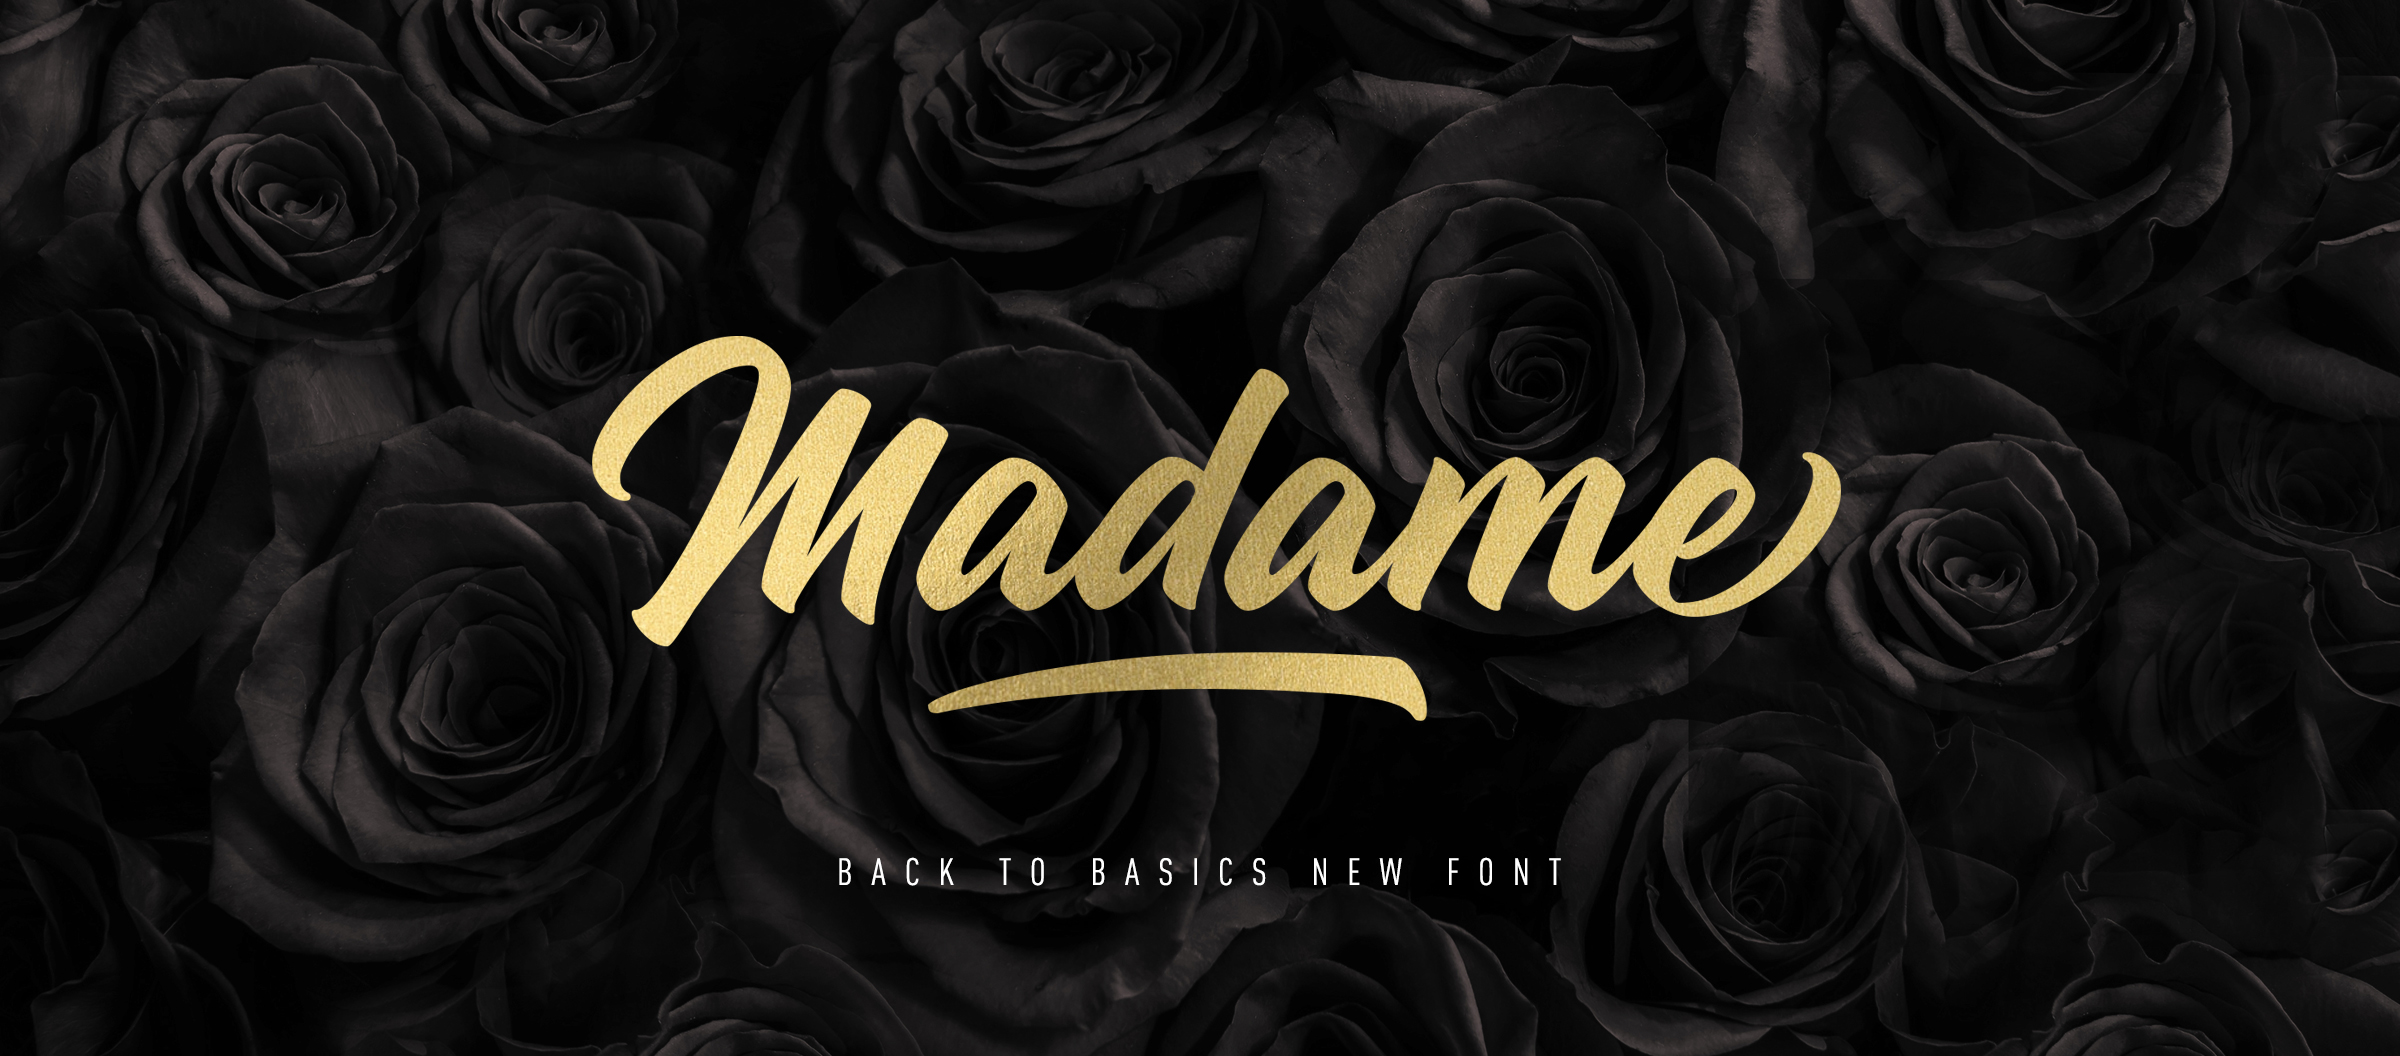 Madame is a back to basics script font.
The full commercial version is provided with a set of alternate glyphes and ligatures.